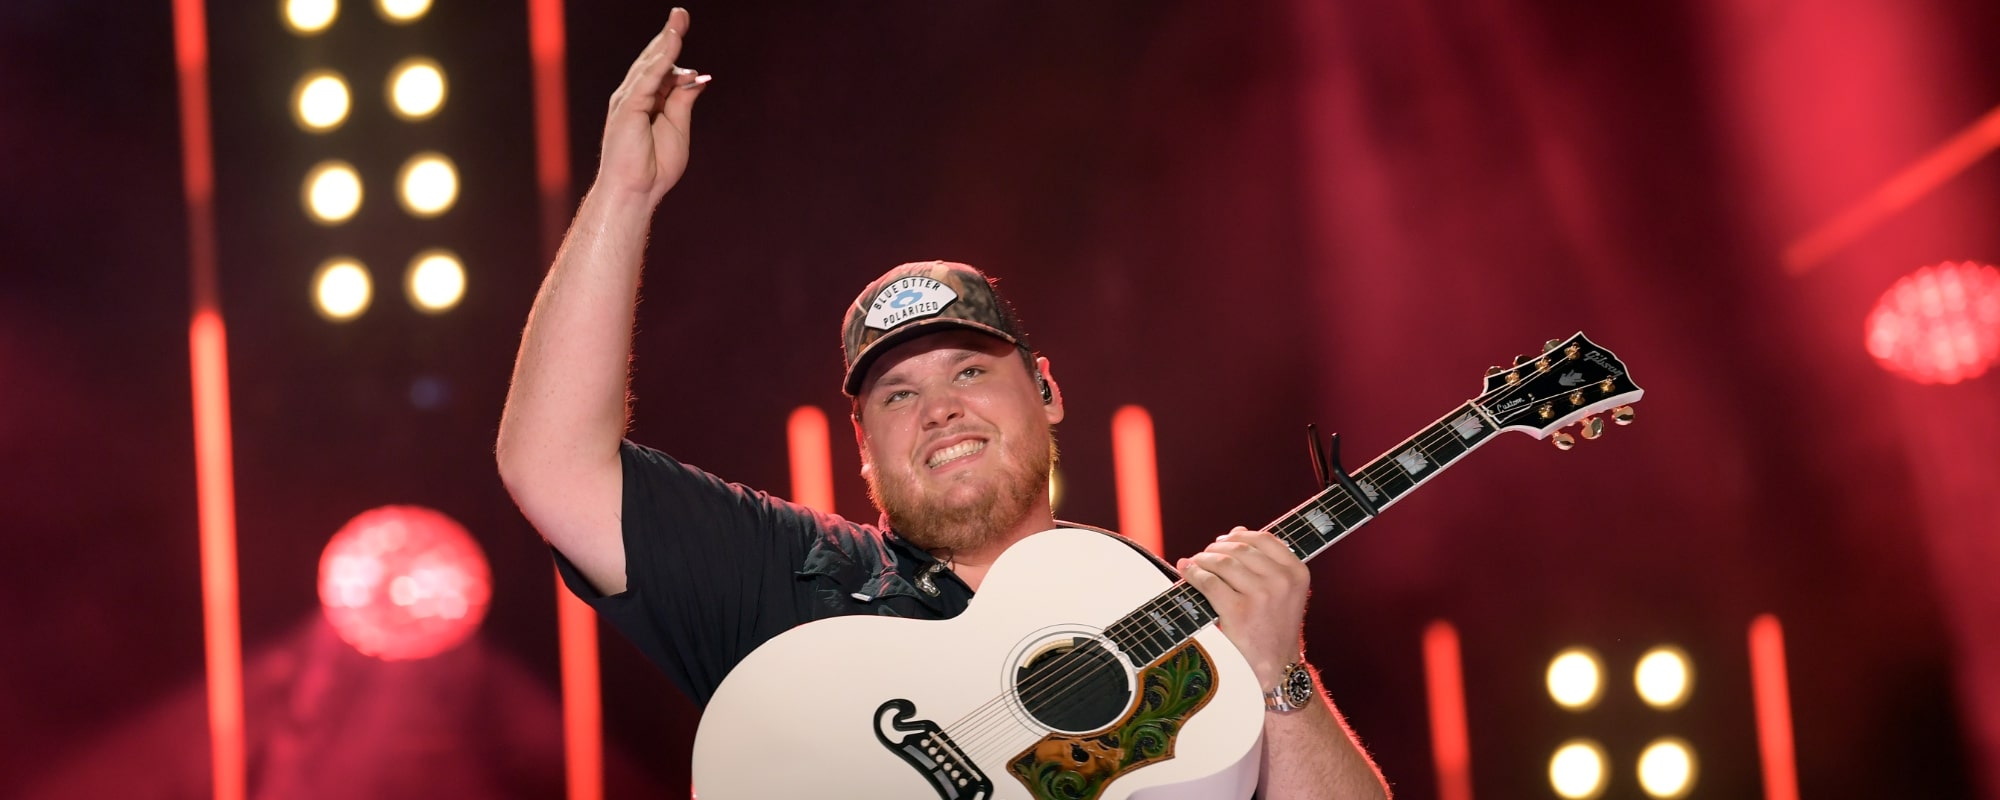 Luke Combs released a new country album perfect for Father's Day